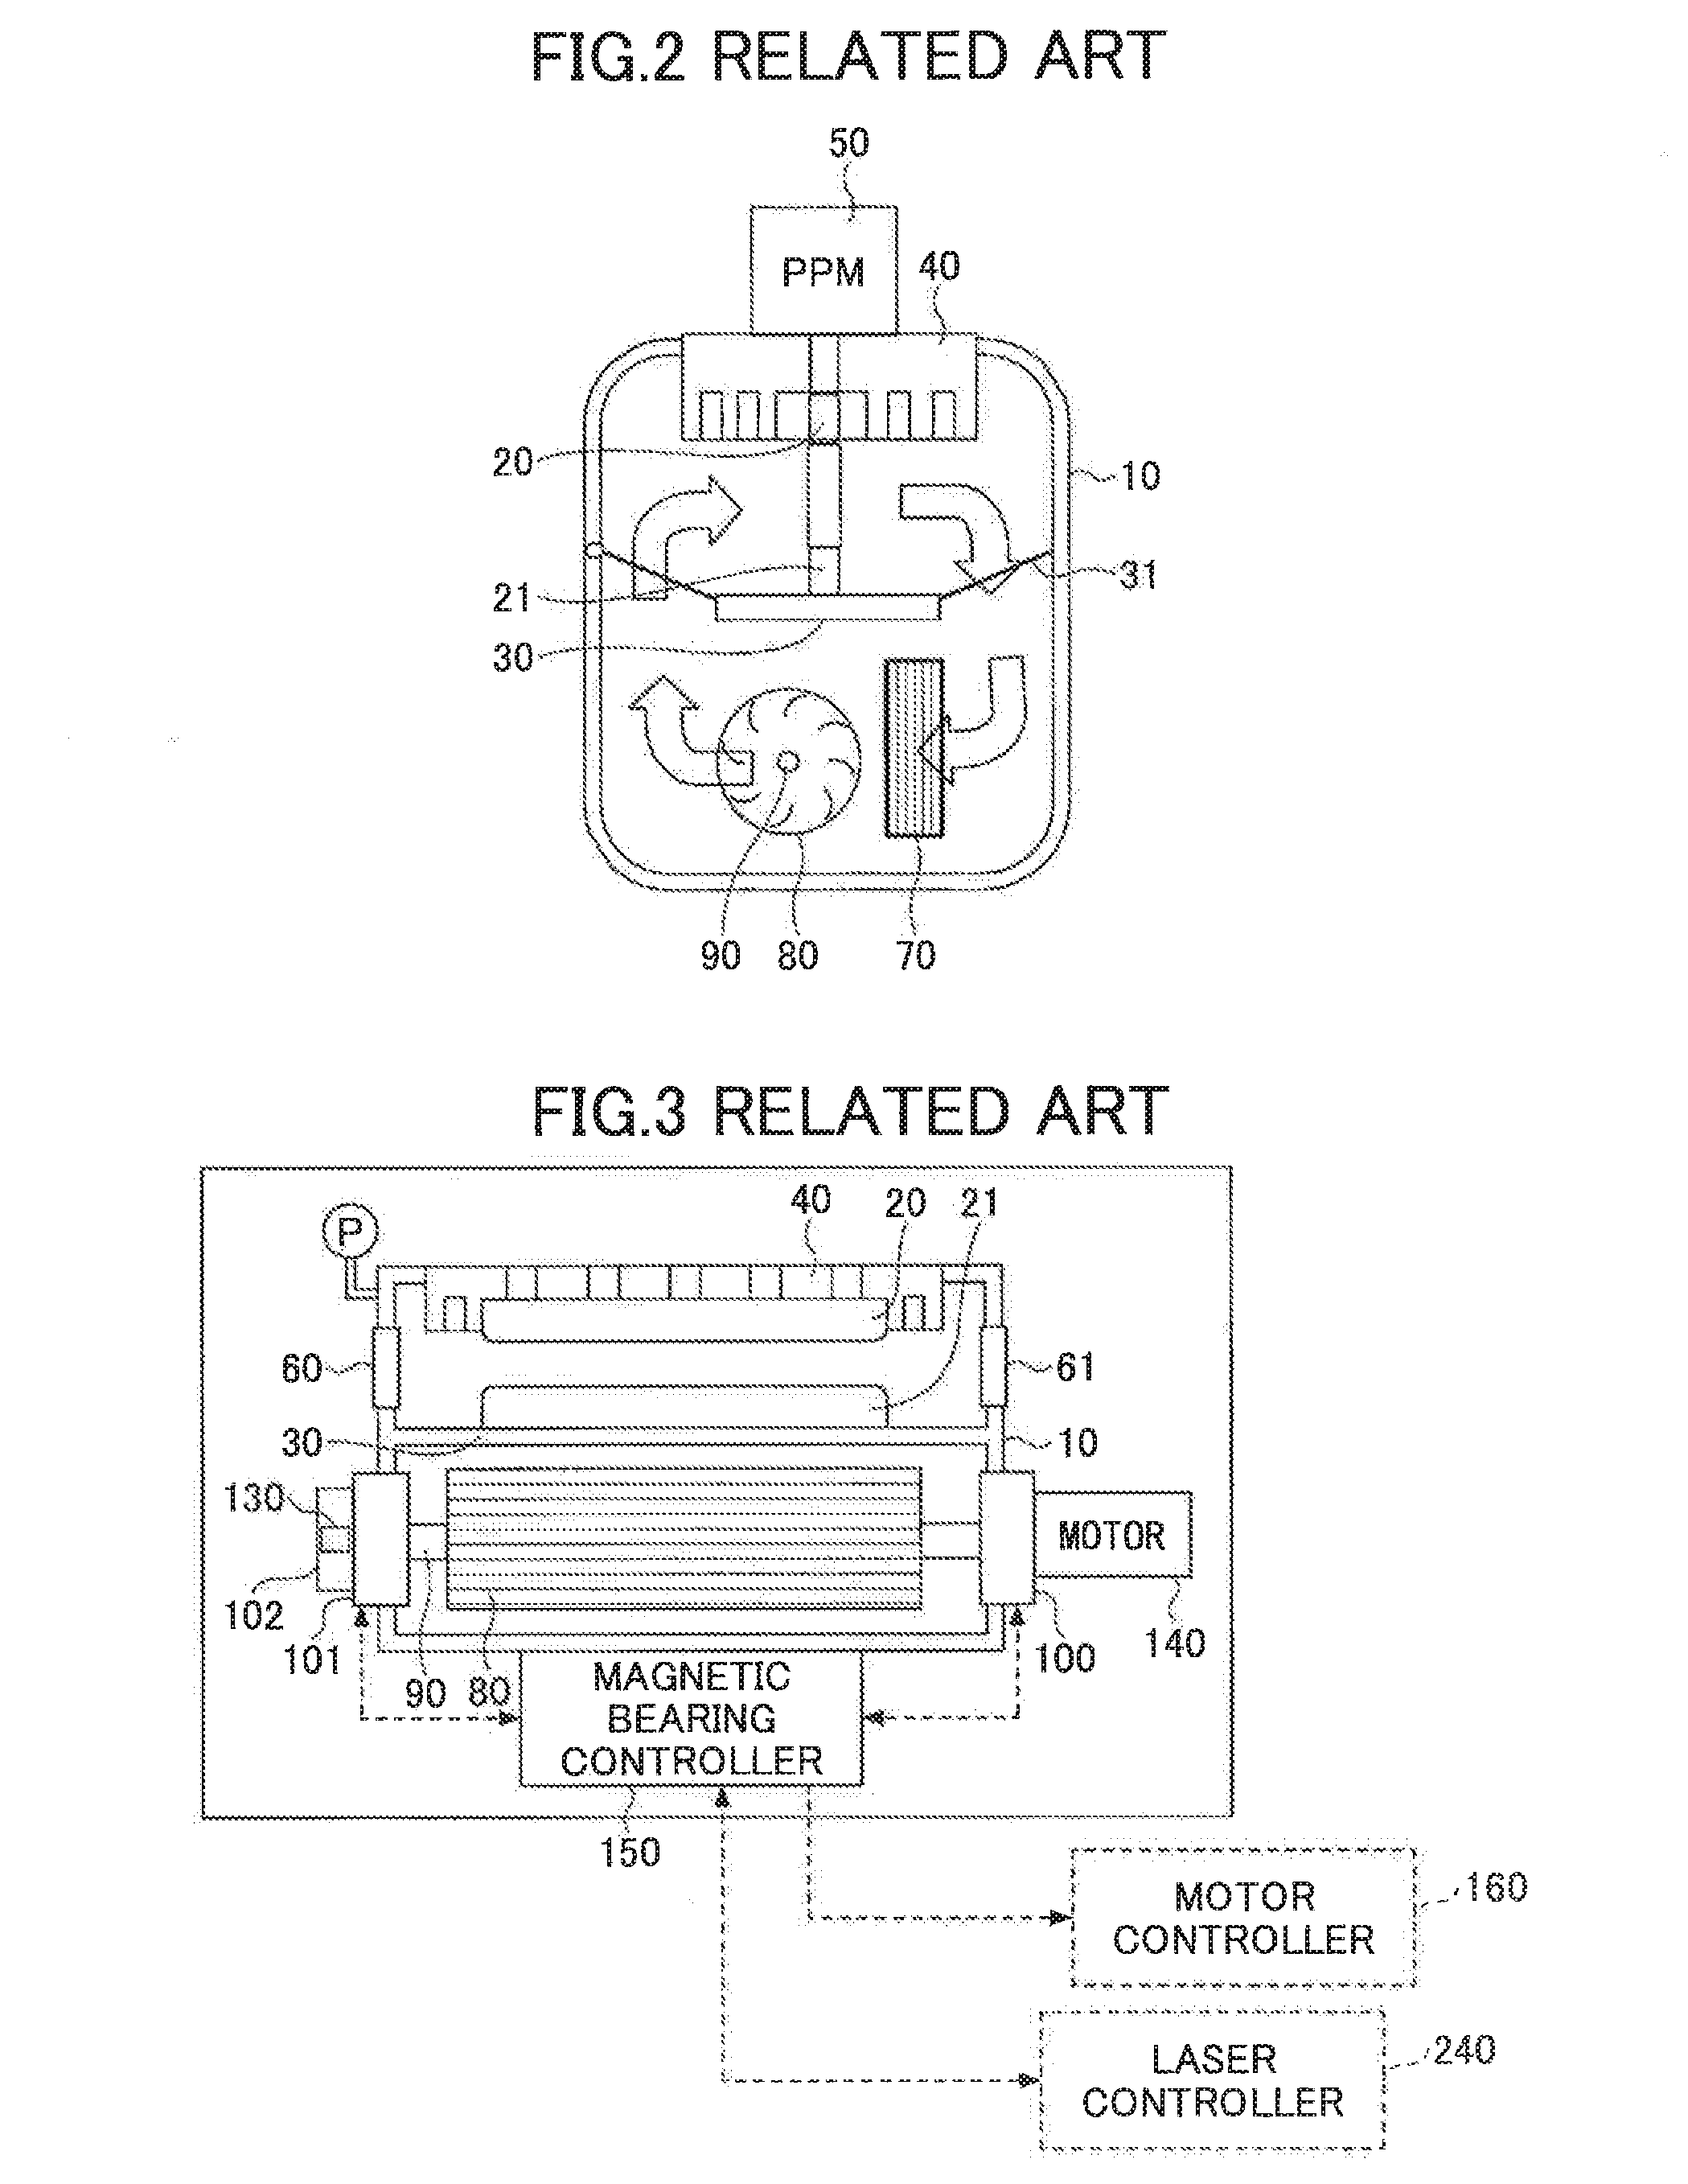 Discharge-pumped gas laser device